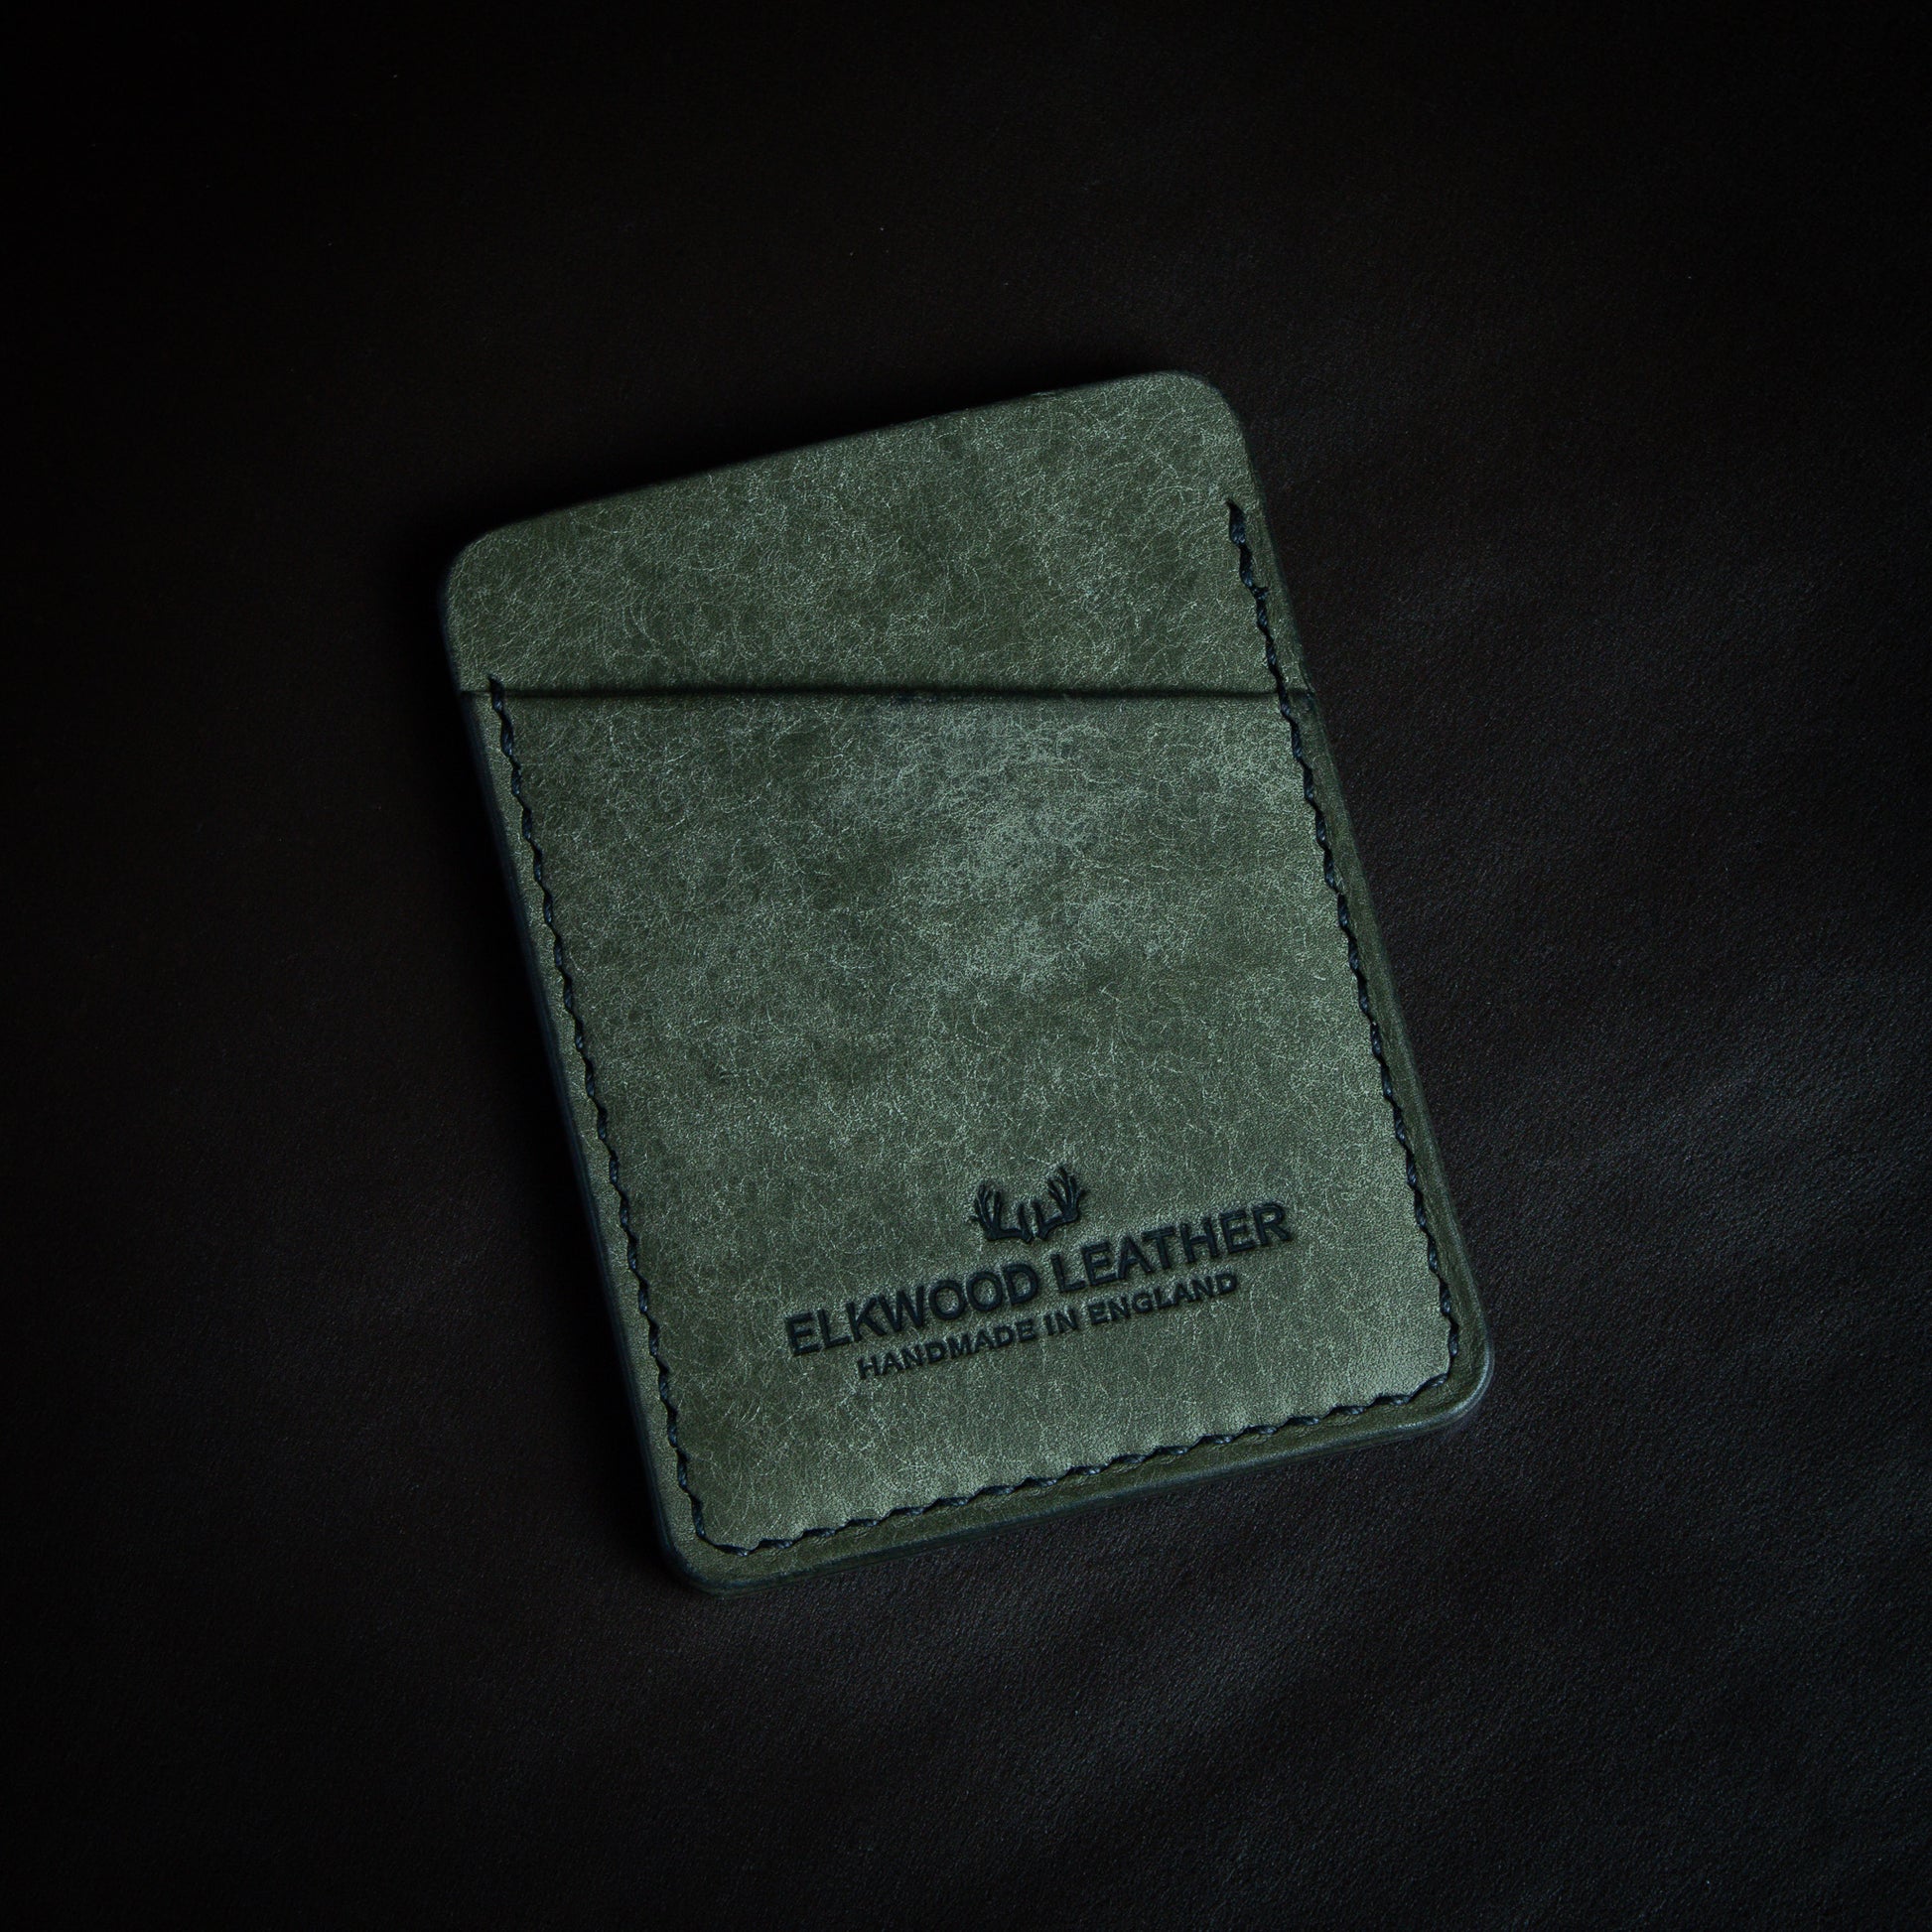 Minimalist cardholder with credit card in slot - Grigio Pueblo leather front side